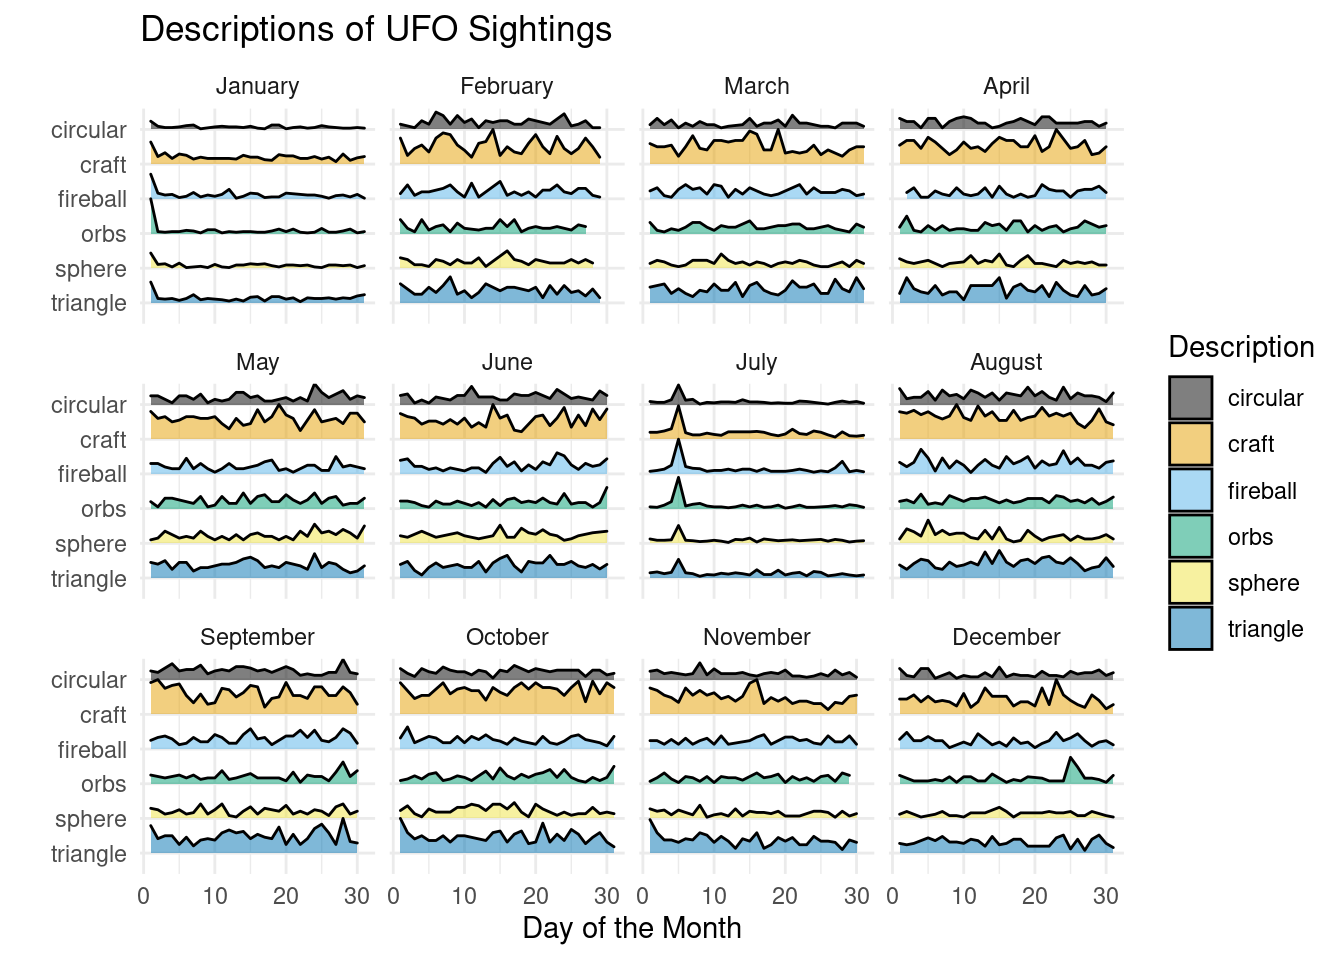 This is a ridgeline plot titled Descriptions of UFO Sightings and displays the word usage of circular, craft, fireball, orbs, sphere, and triangle for each day of the month and is faceted by month. For most months, different word usage appears to peak randomly and independently of each other. For January there is a noticeable peak for every word on the same day with the rest of the plot being flat otherwise. There is a similar peak in July for a single day.